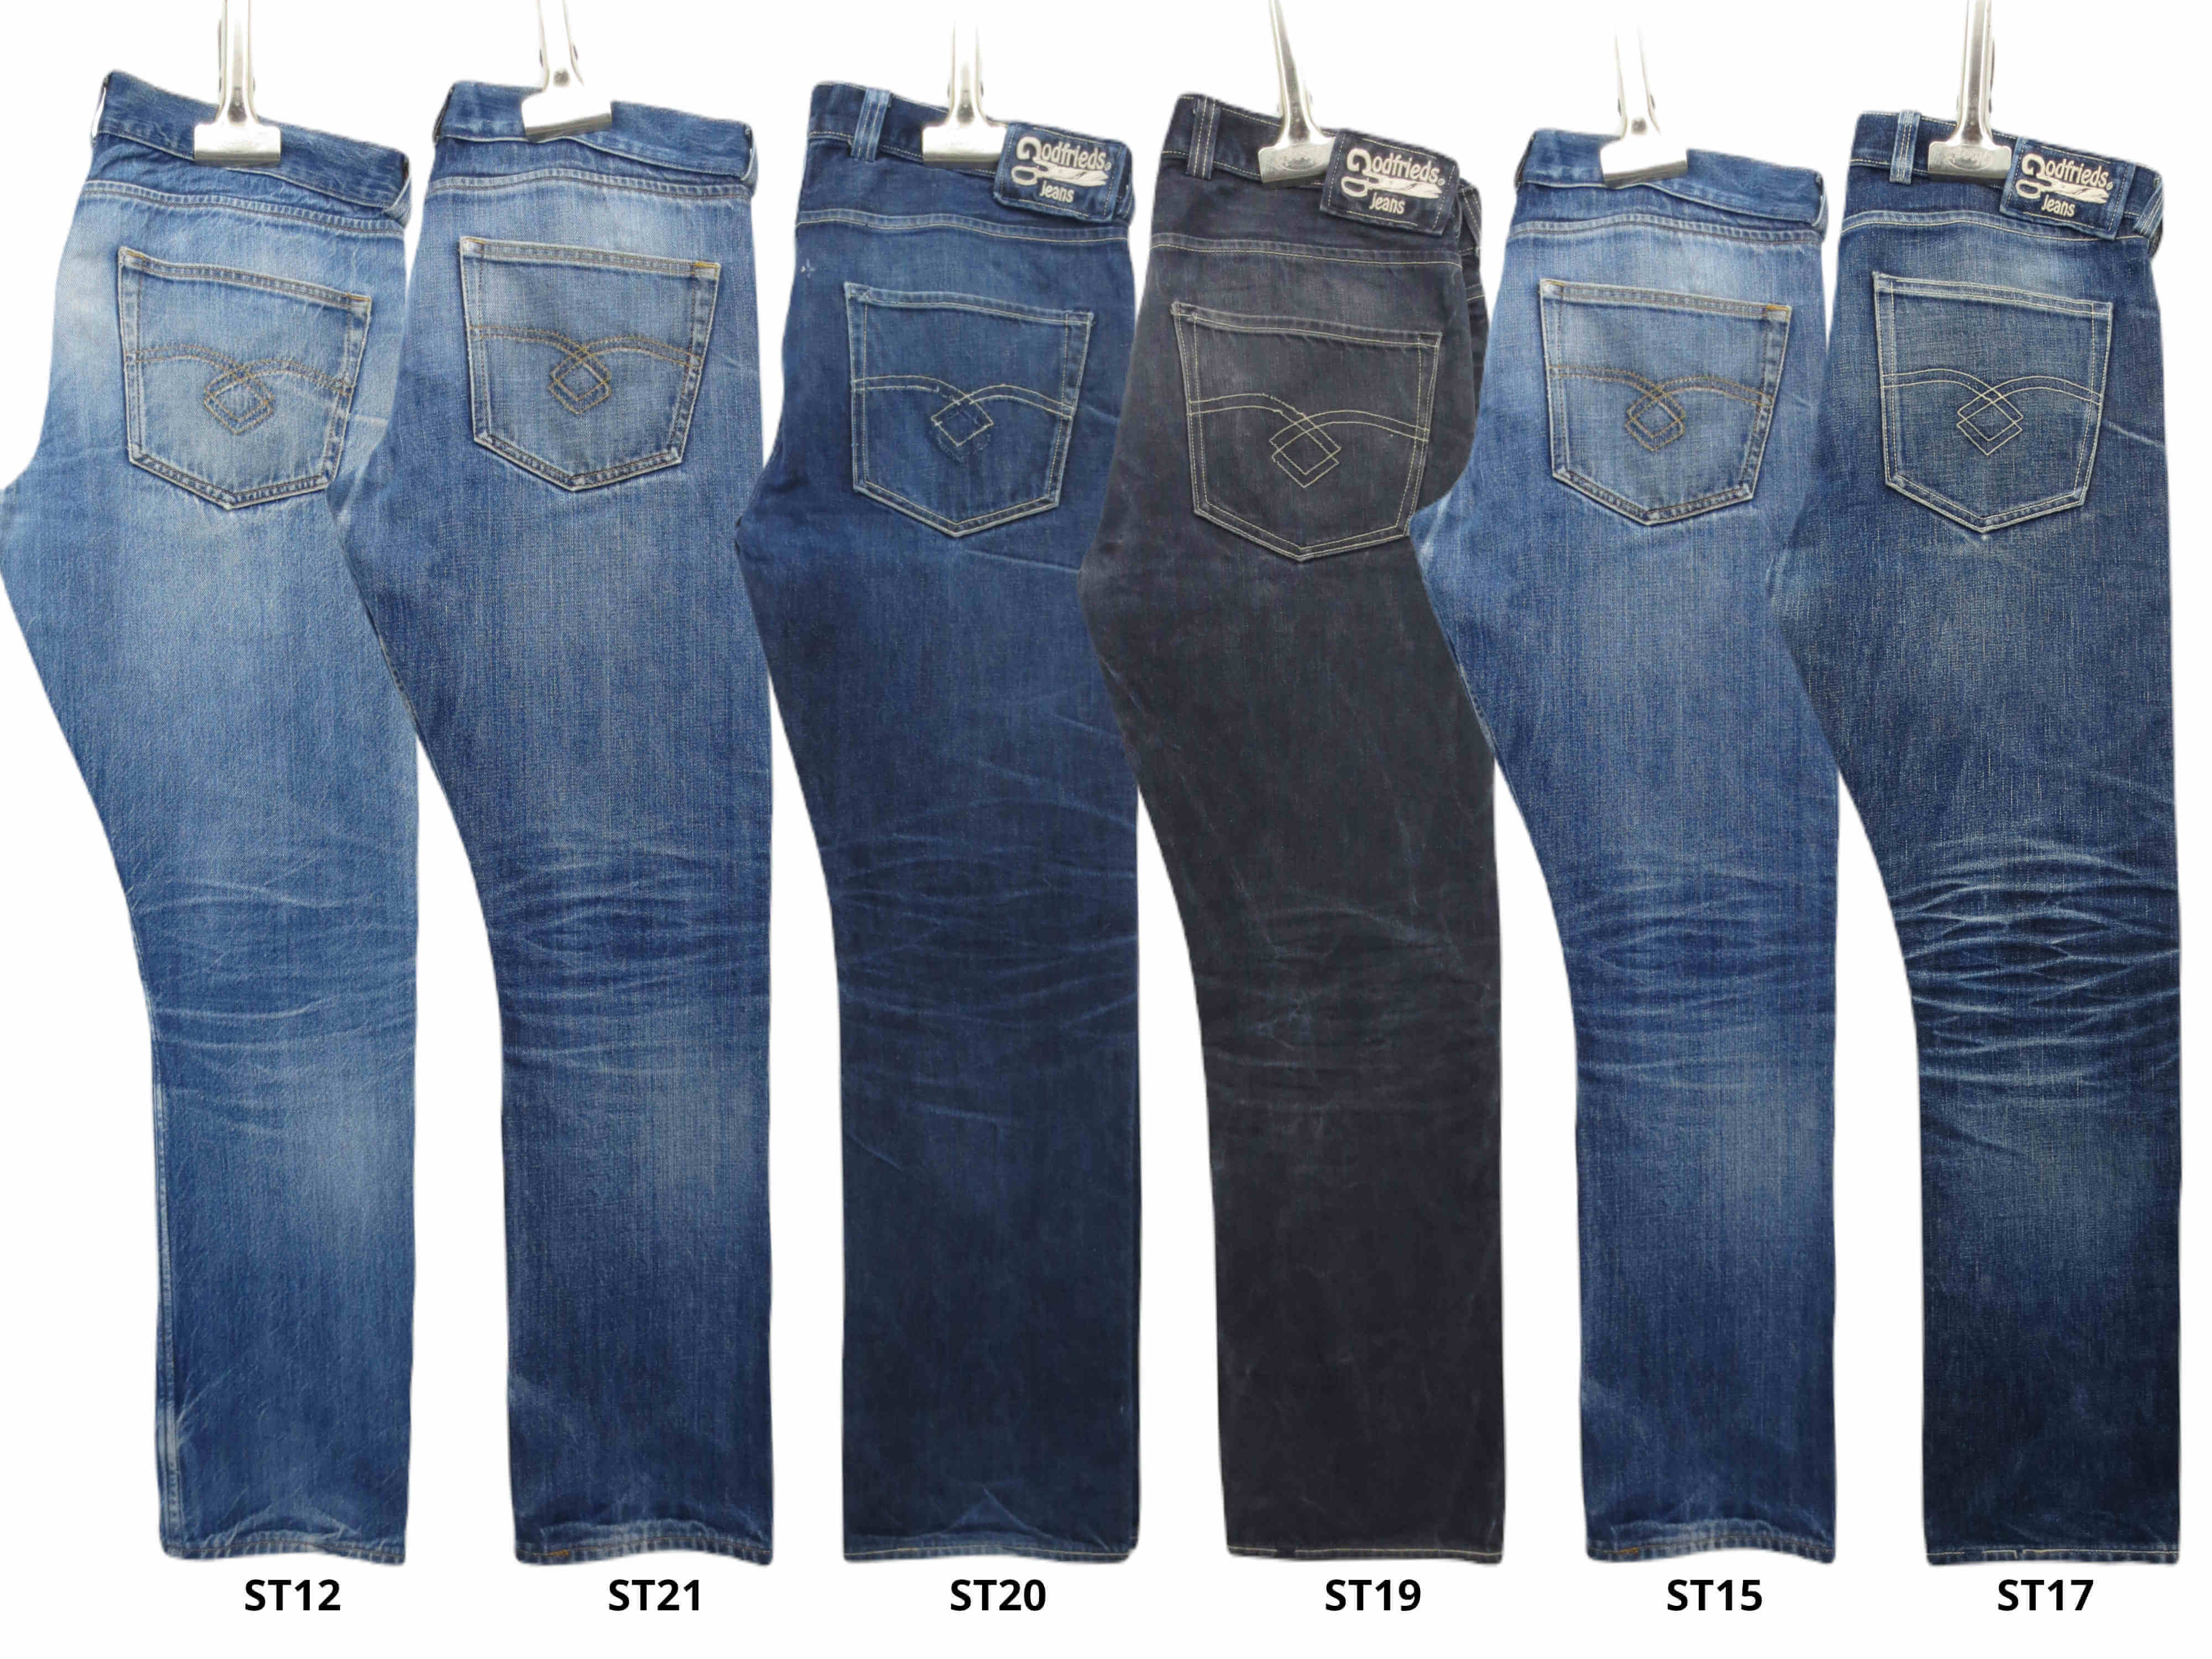 our denims look like after being worn for 365 days